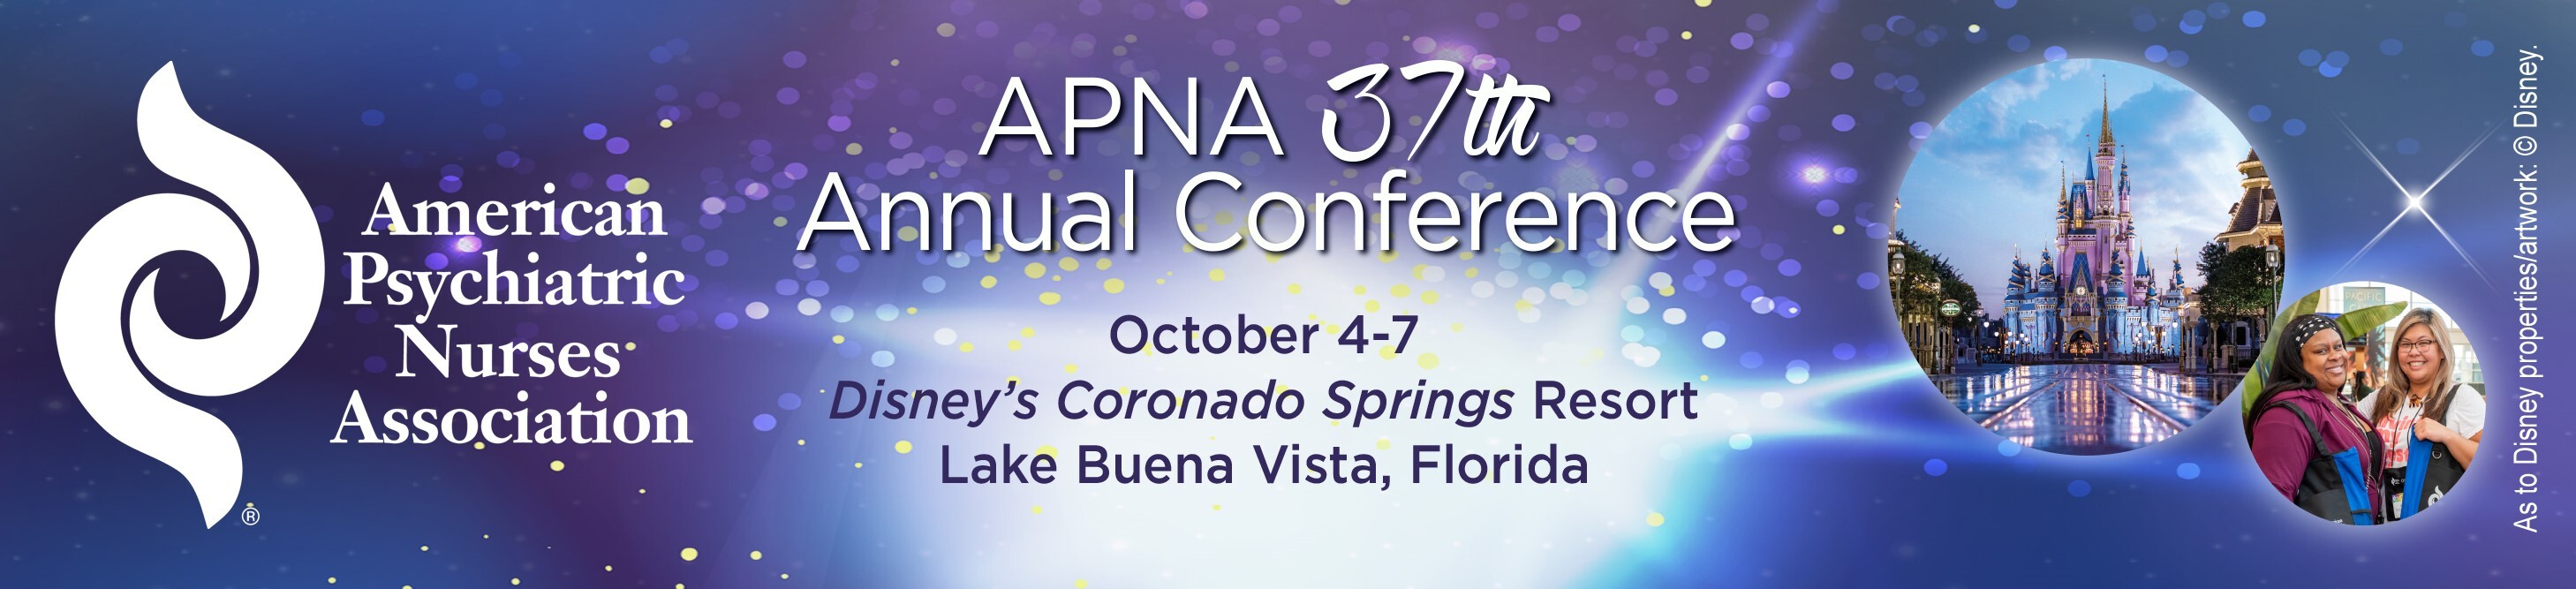 APNA 36th Annual Conference